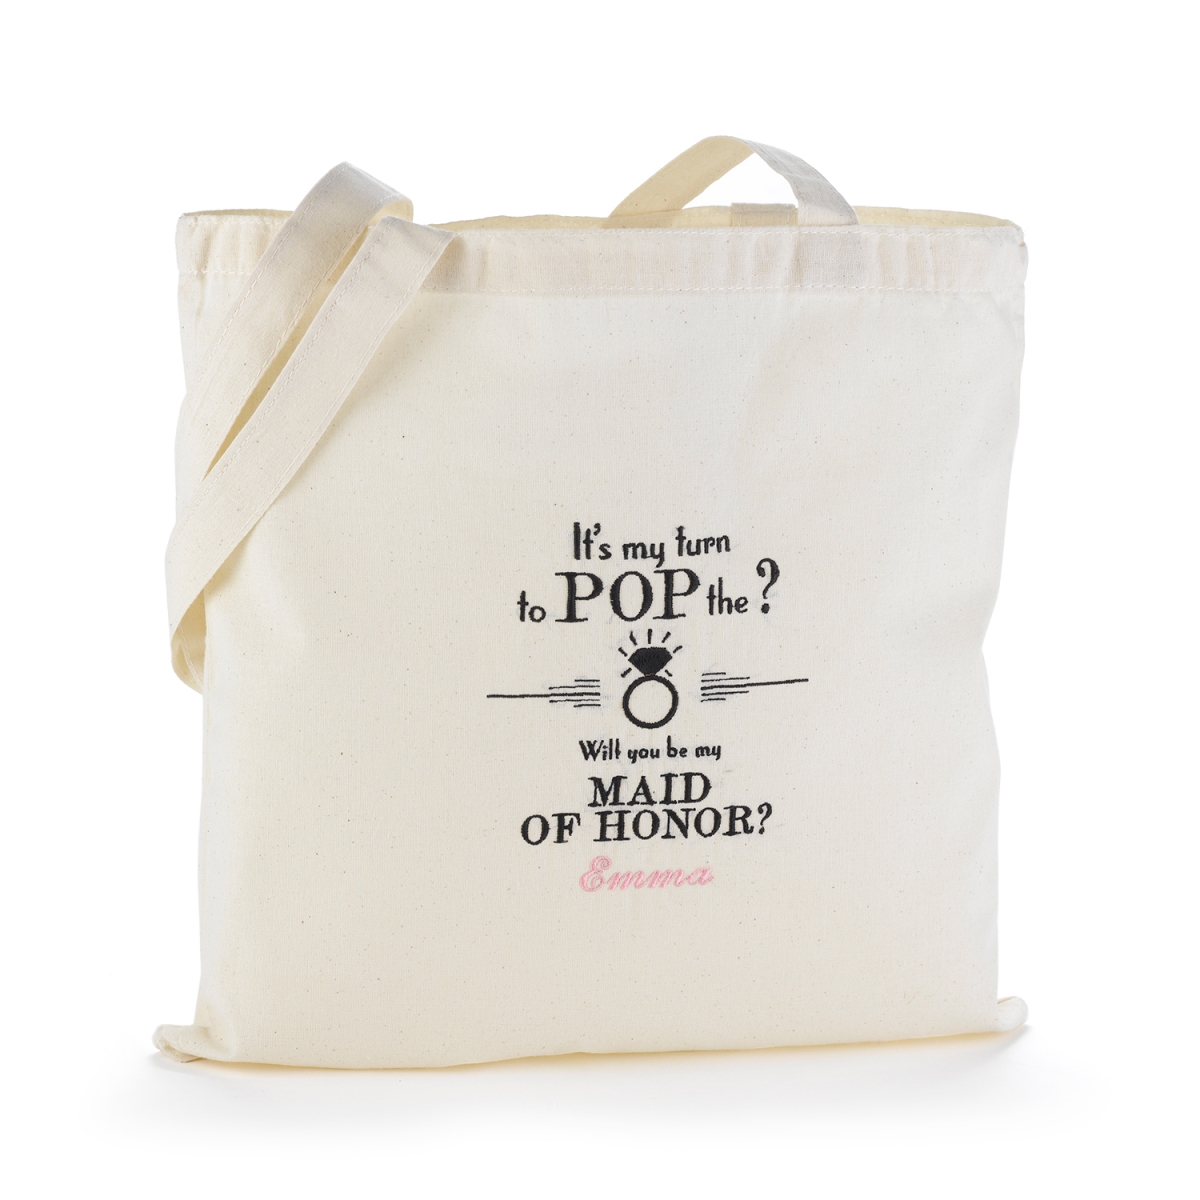 Hortense B. Hewitt 50037p Pop The Question Tote Bag - Maid Of Honor - Personalized